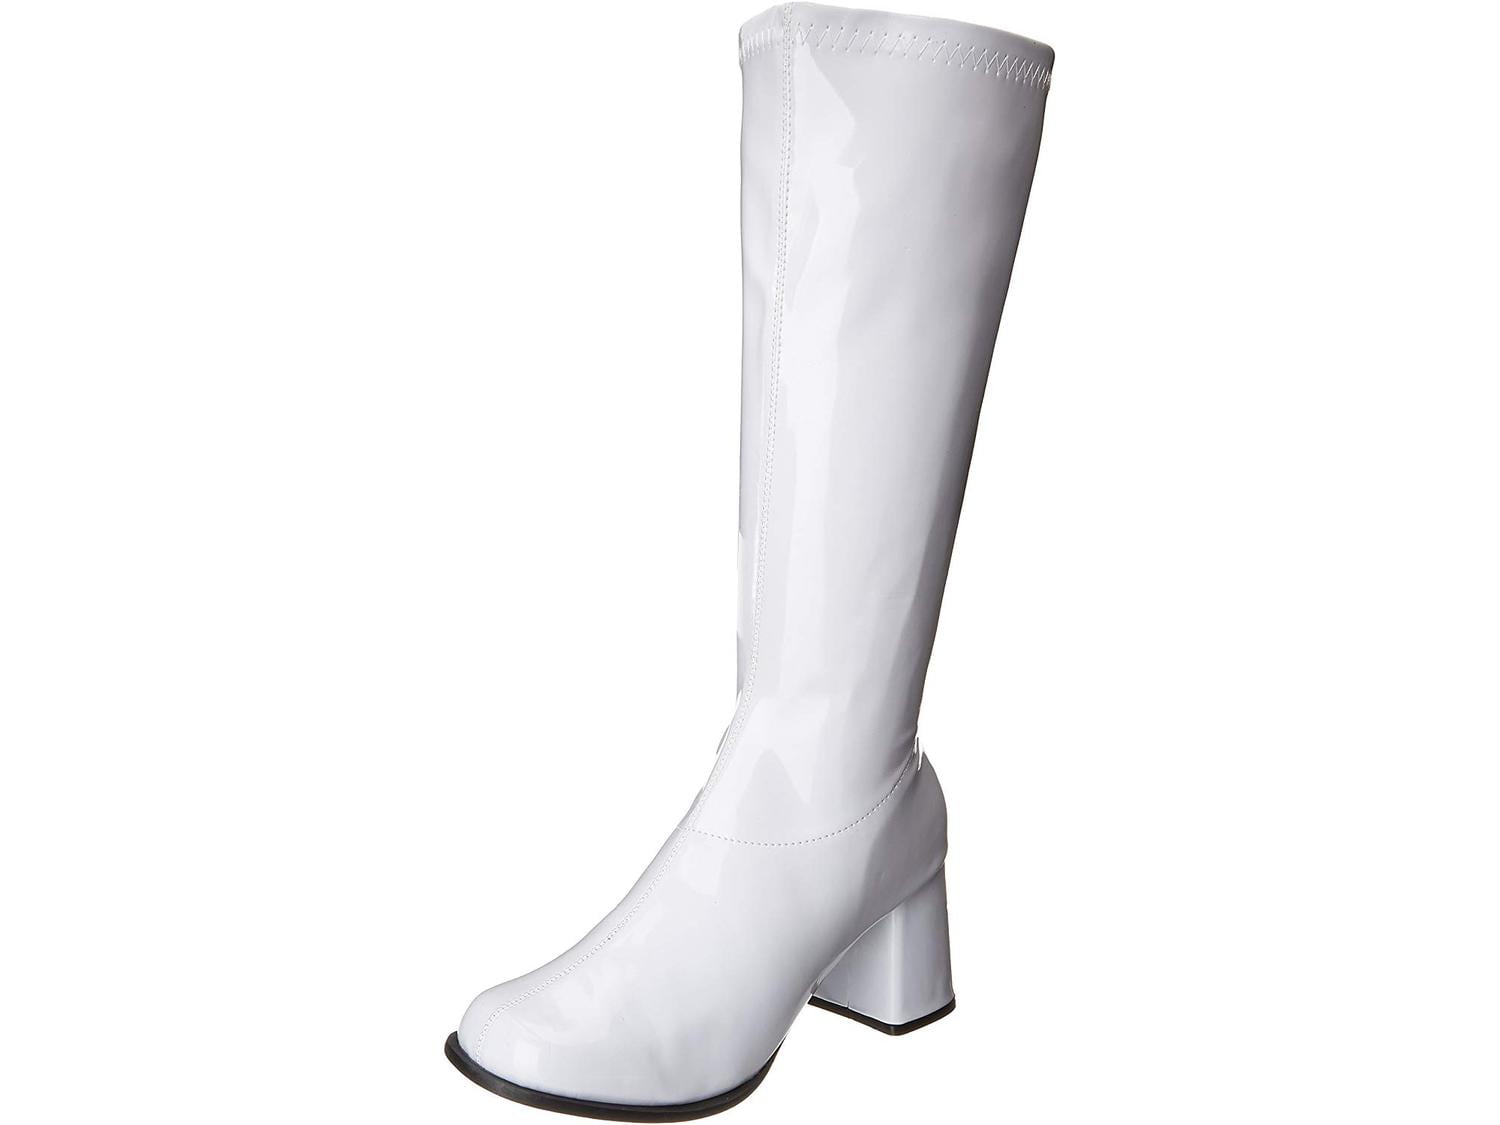 Groovy Disco White Fabric 70s Hippie Fake Boots for Women and Girls Costumes Skeleteen White Costume Boot Covers 